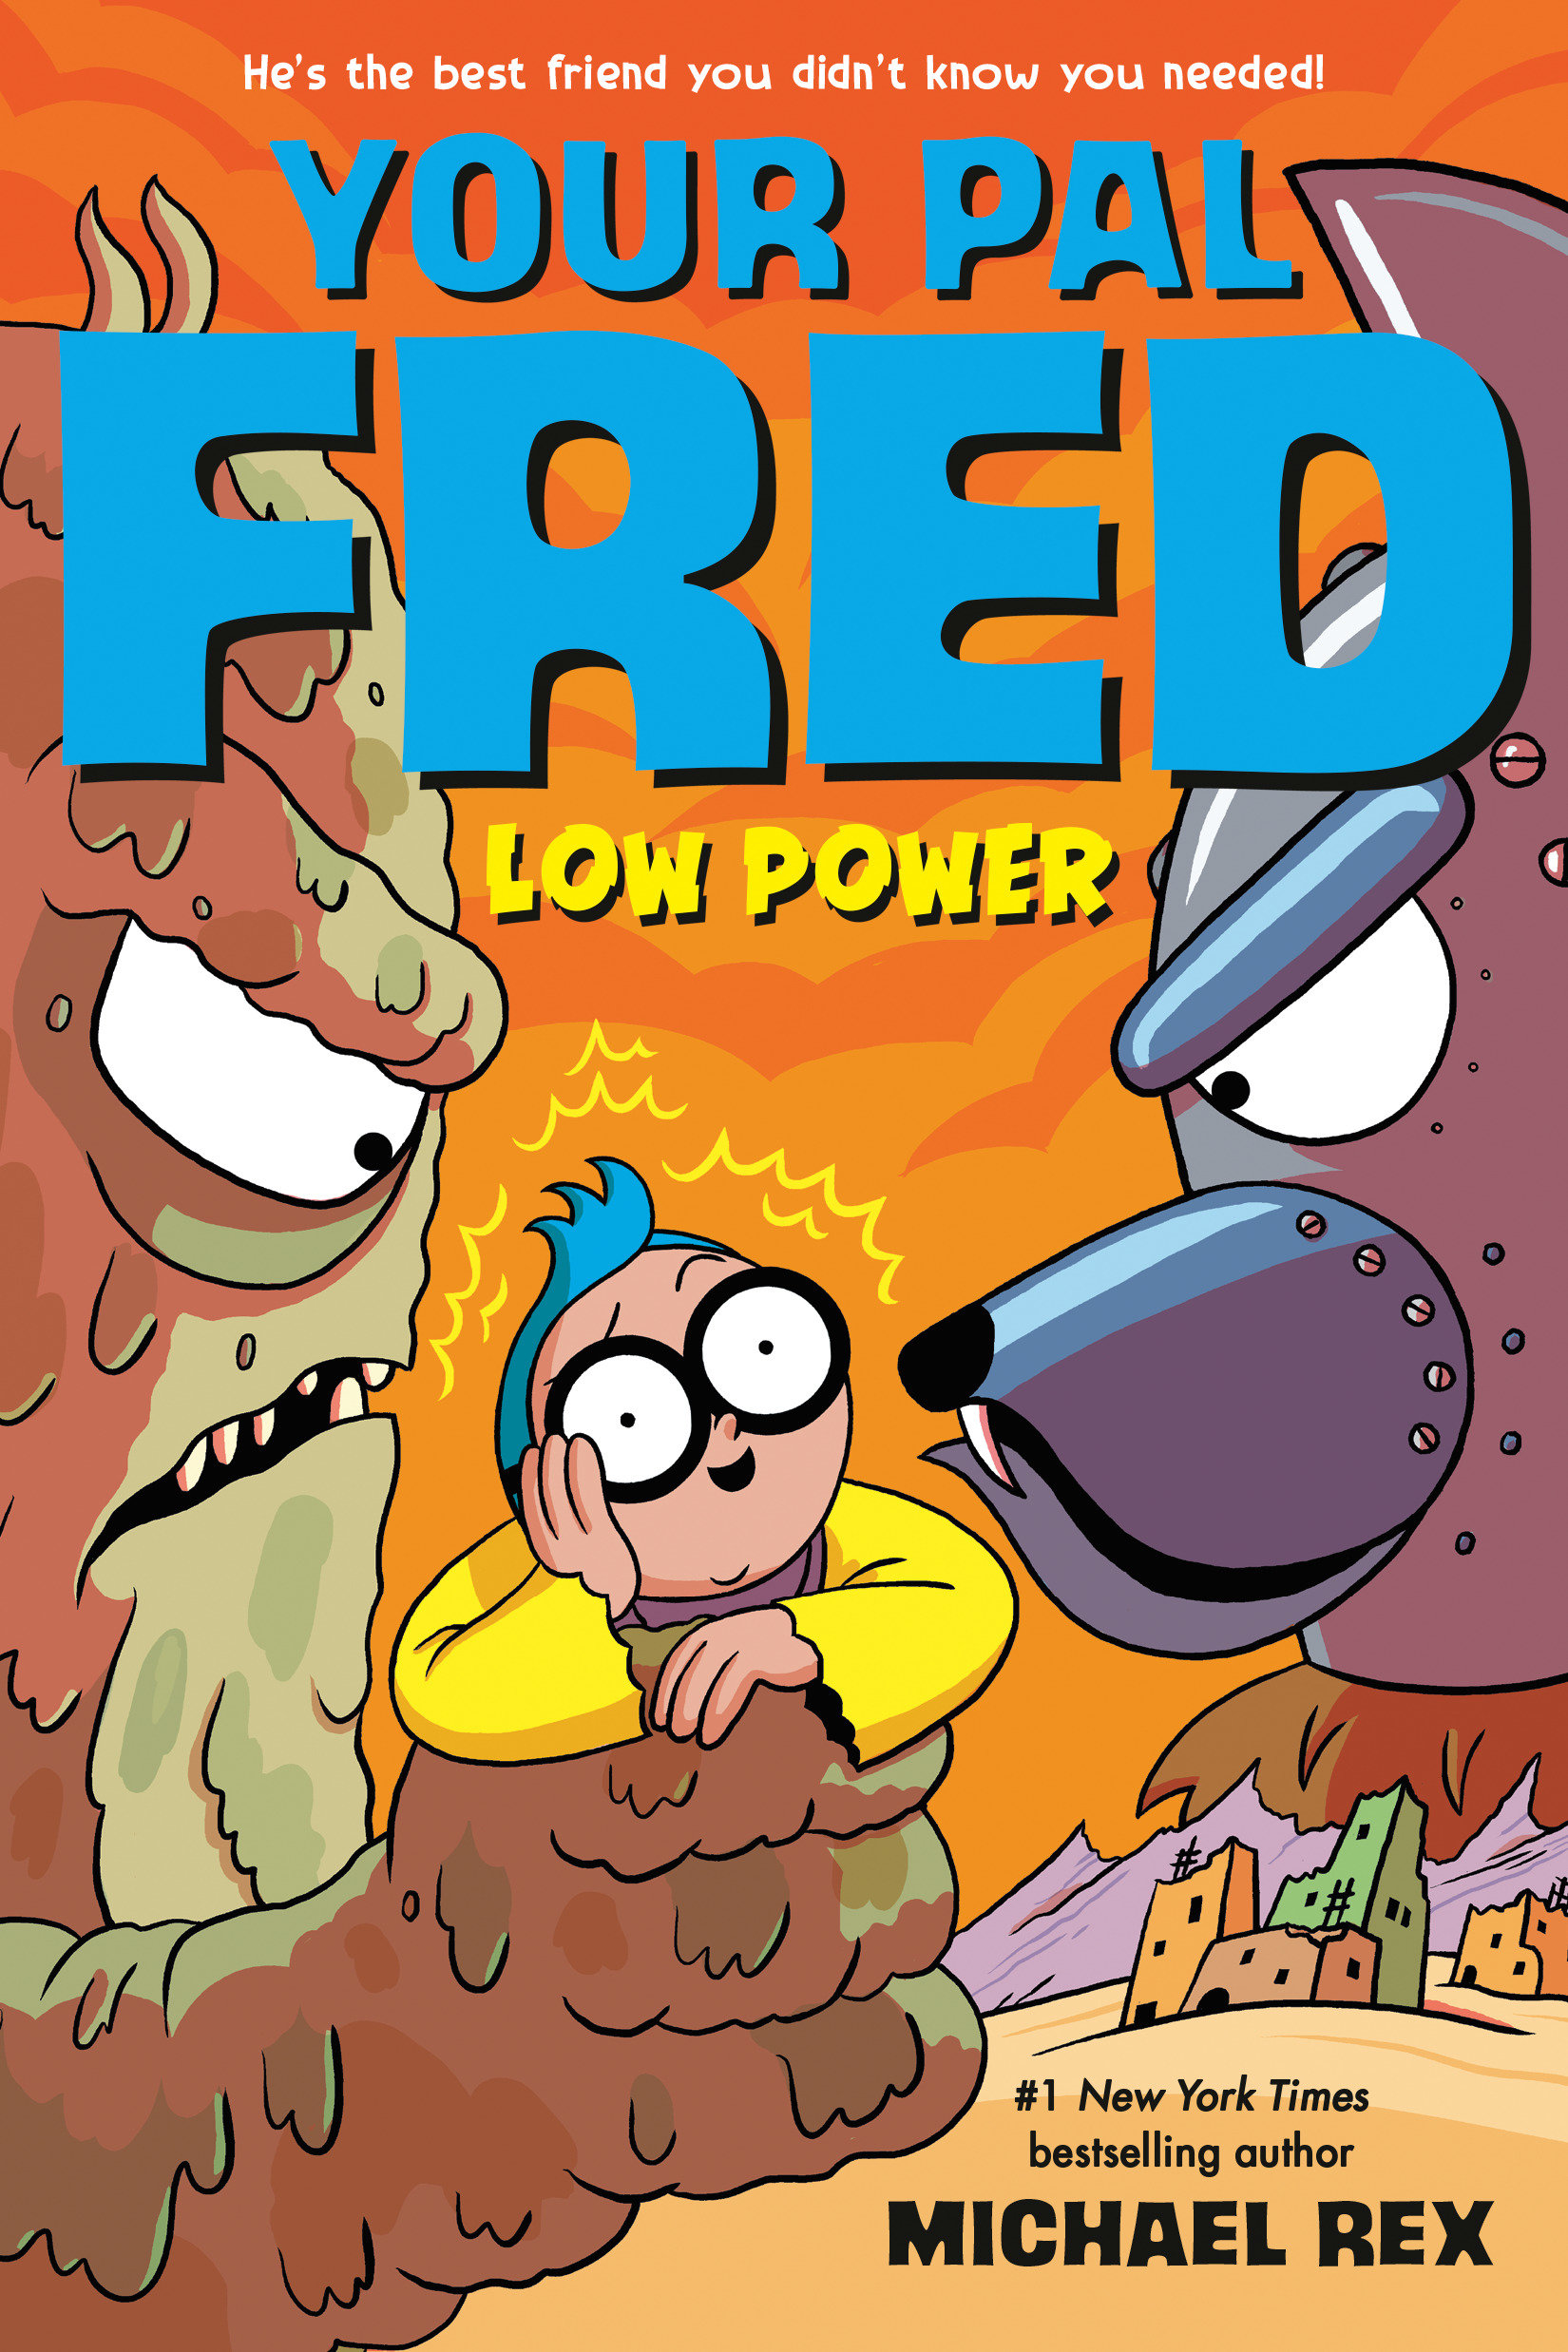 Your Pal Fred Hardcover Graphic Novel Volume 2 Low Power